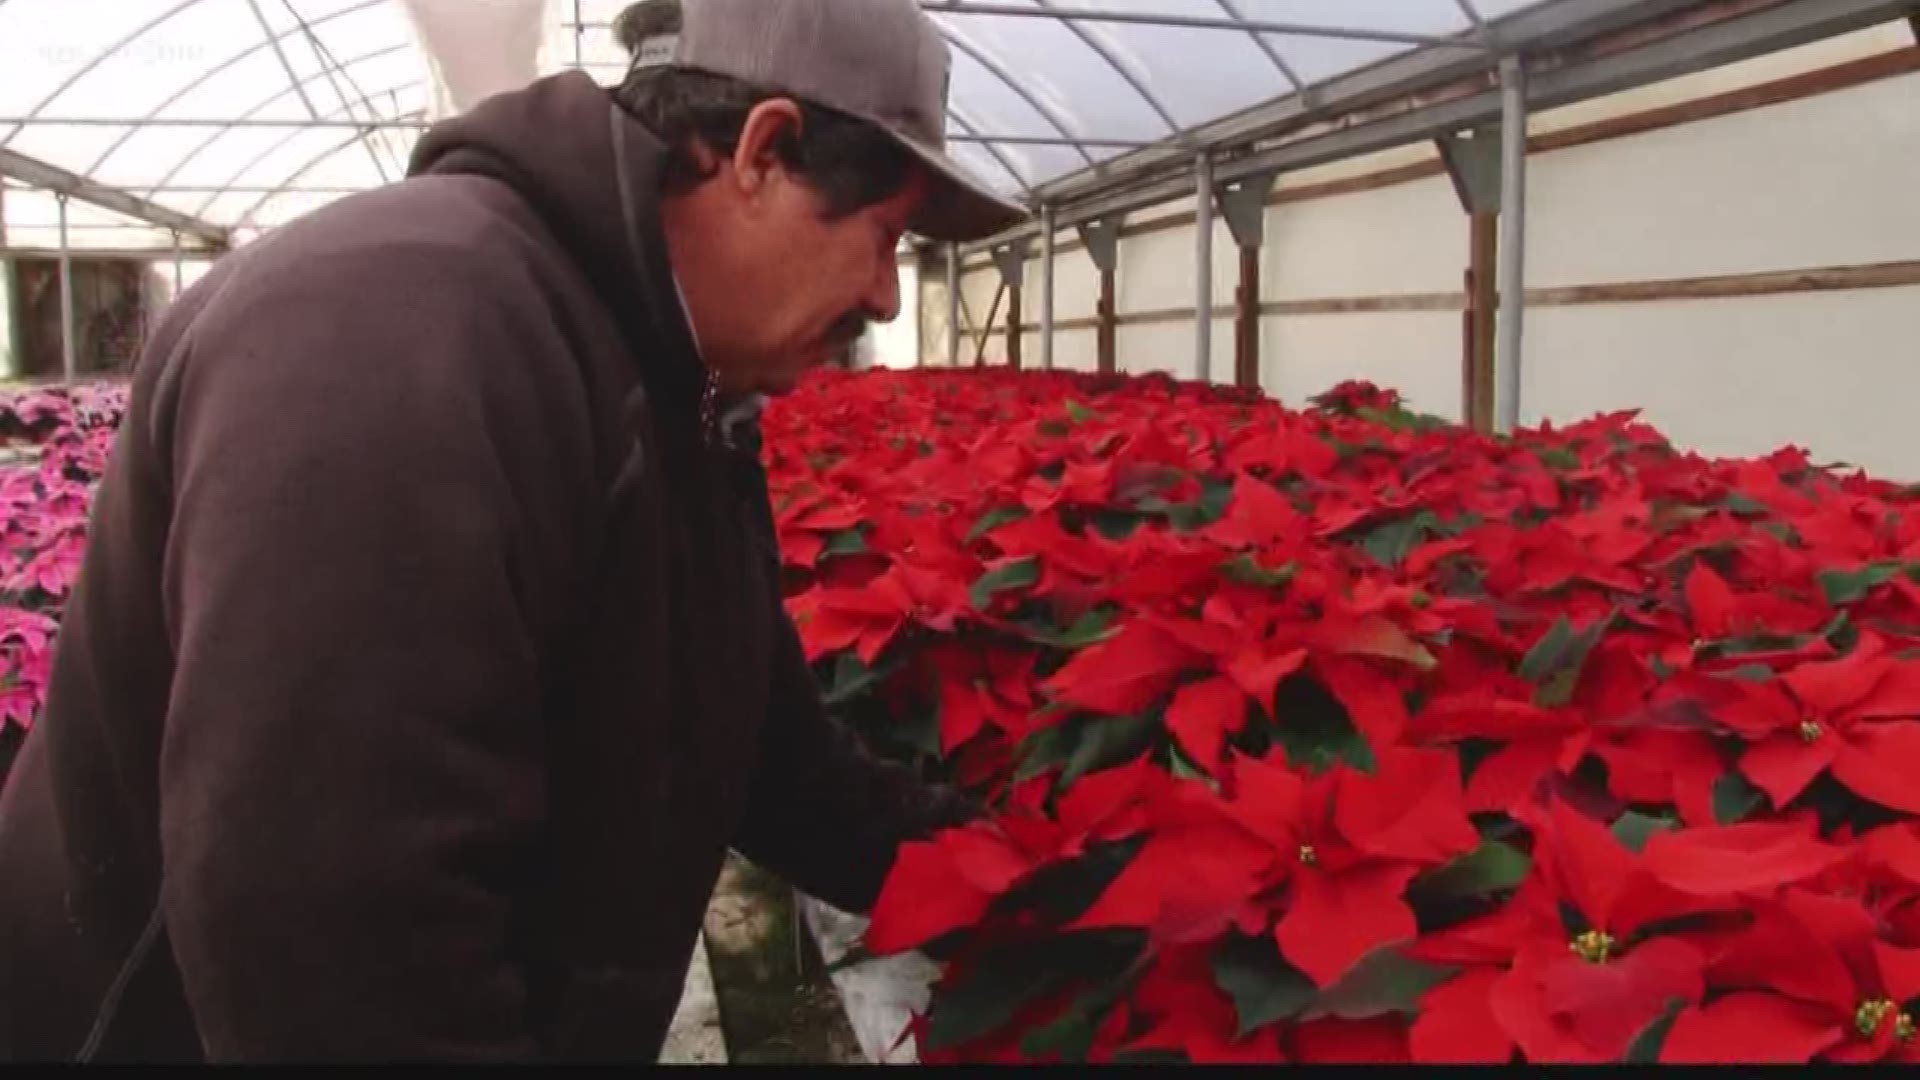 The red leafy plant blooms in December and has a rich history with the holiday season. The poinsettia is native to Southern Mexico and has been used in religious ceremonies for centuries.